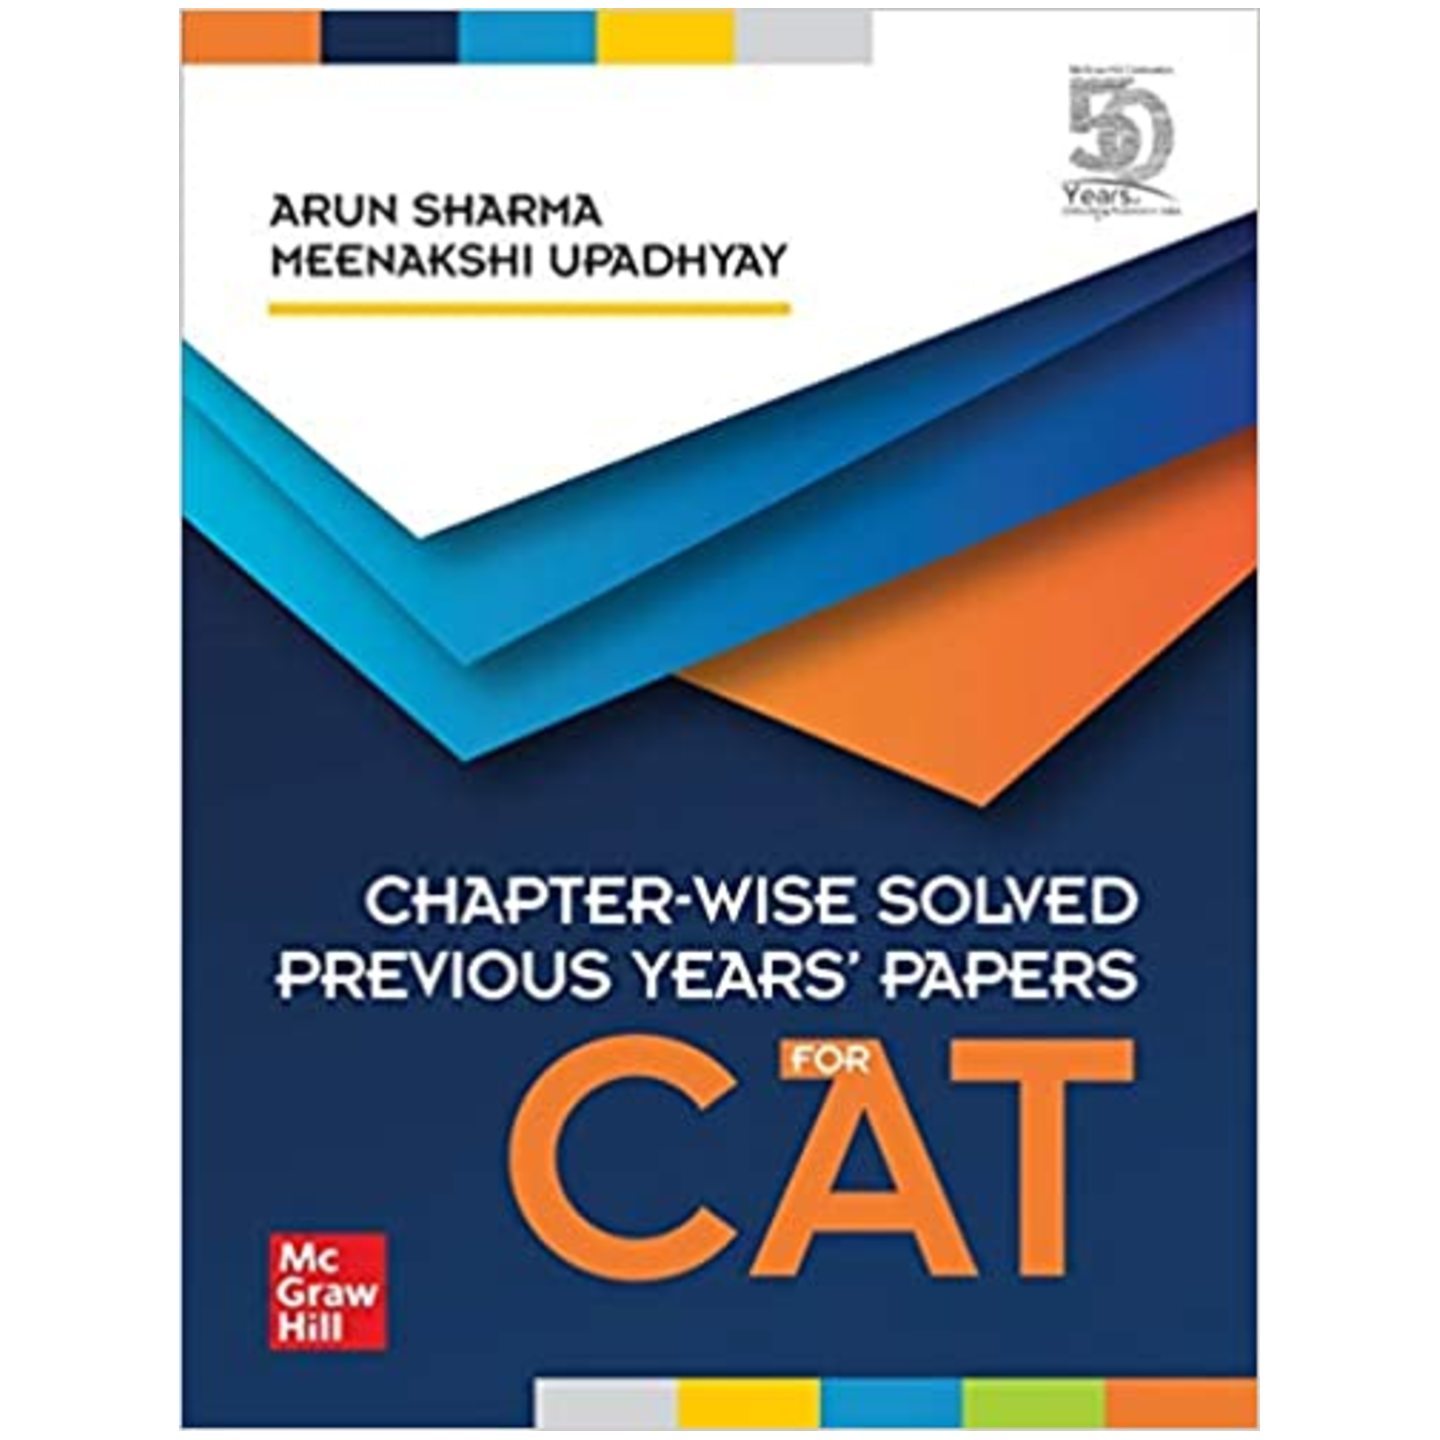 MC GRAW HILL Chapter-Wise Solved Previous Years' Papers for CAT By Arun Sharma and Meenakshi